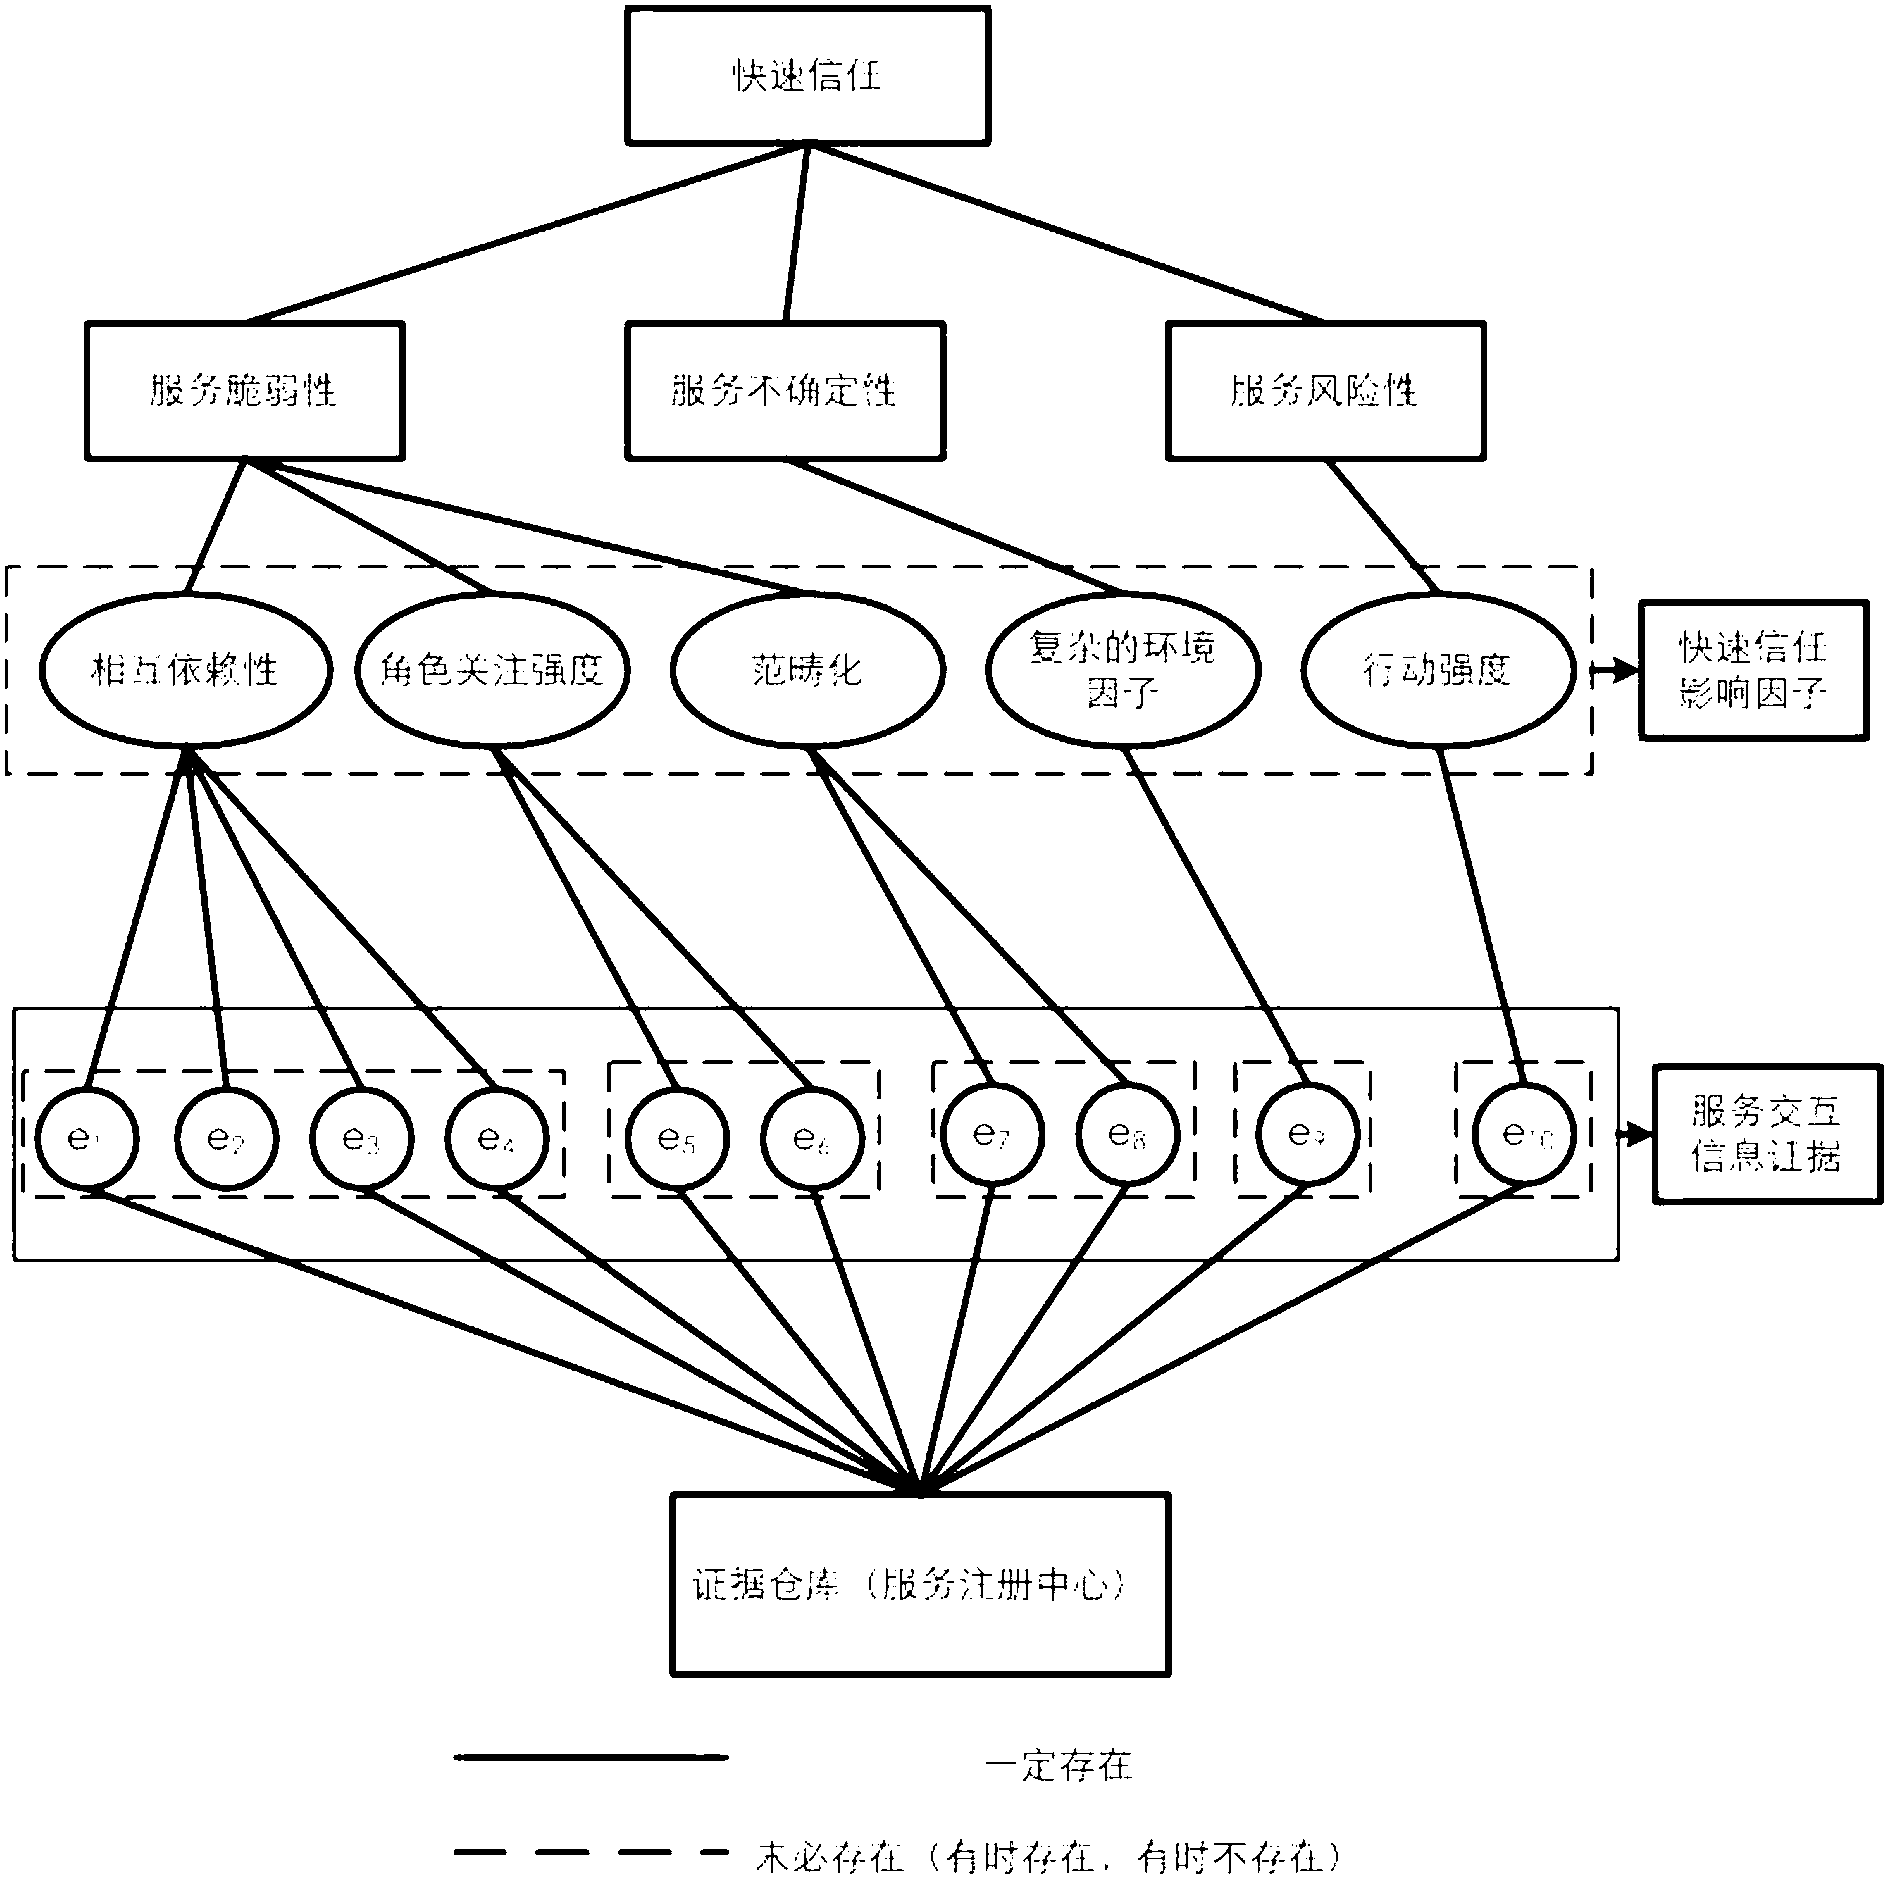 Trust-theory-based trusted service system based on trusted authentication system